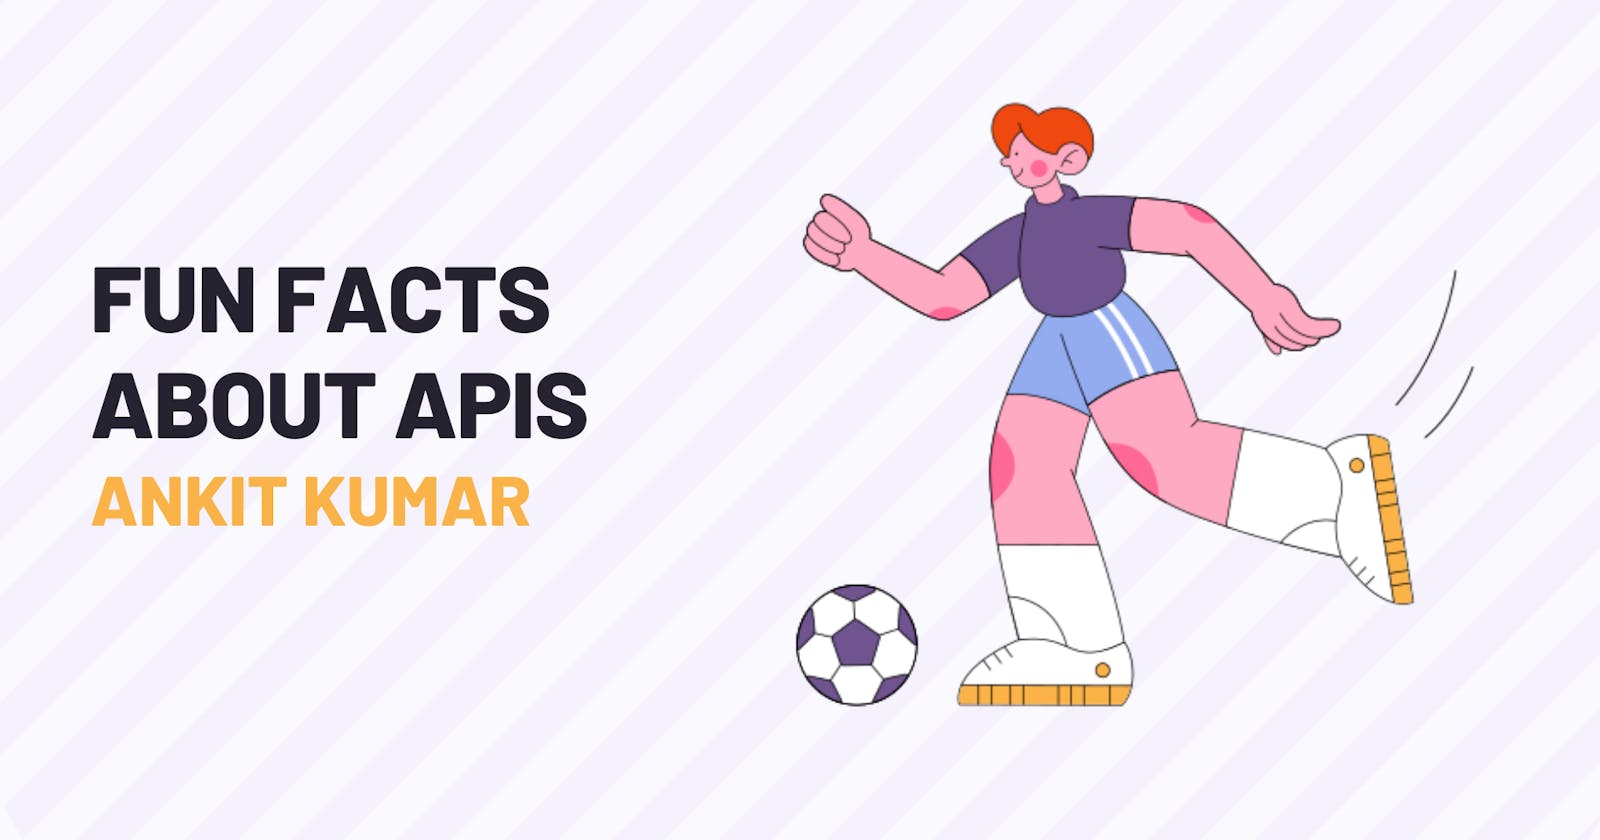 Fun Facts About APIs